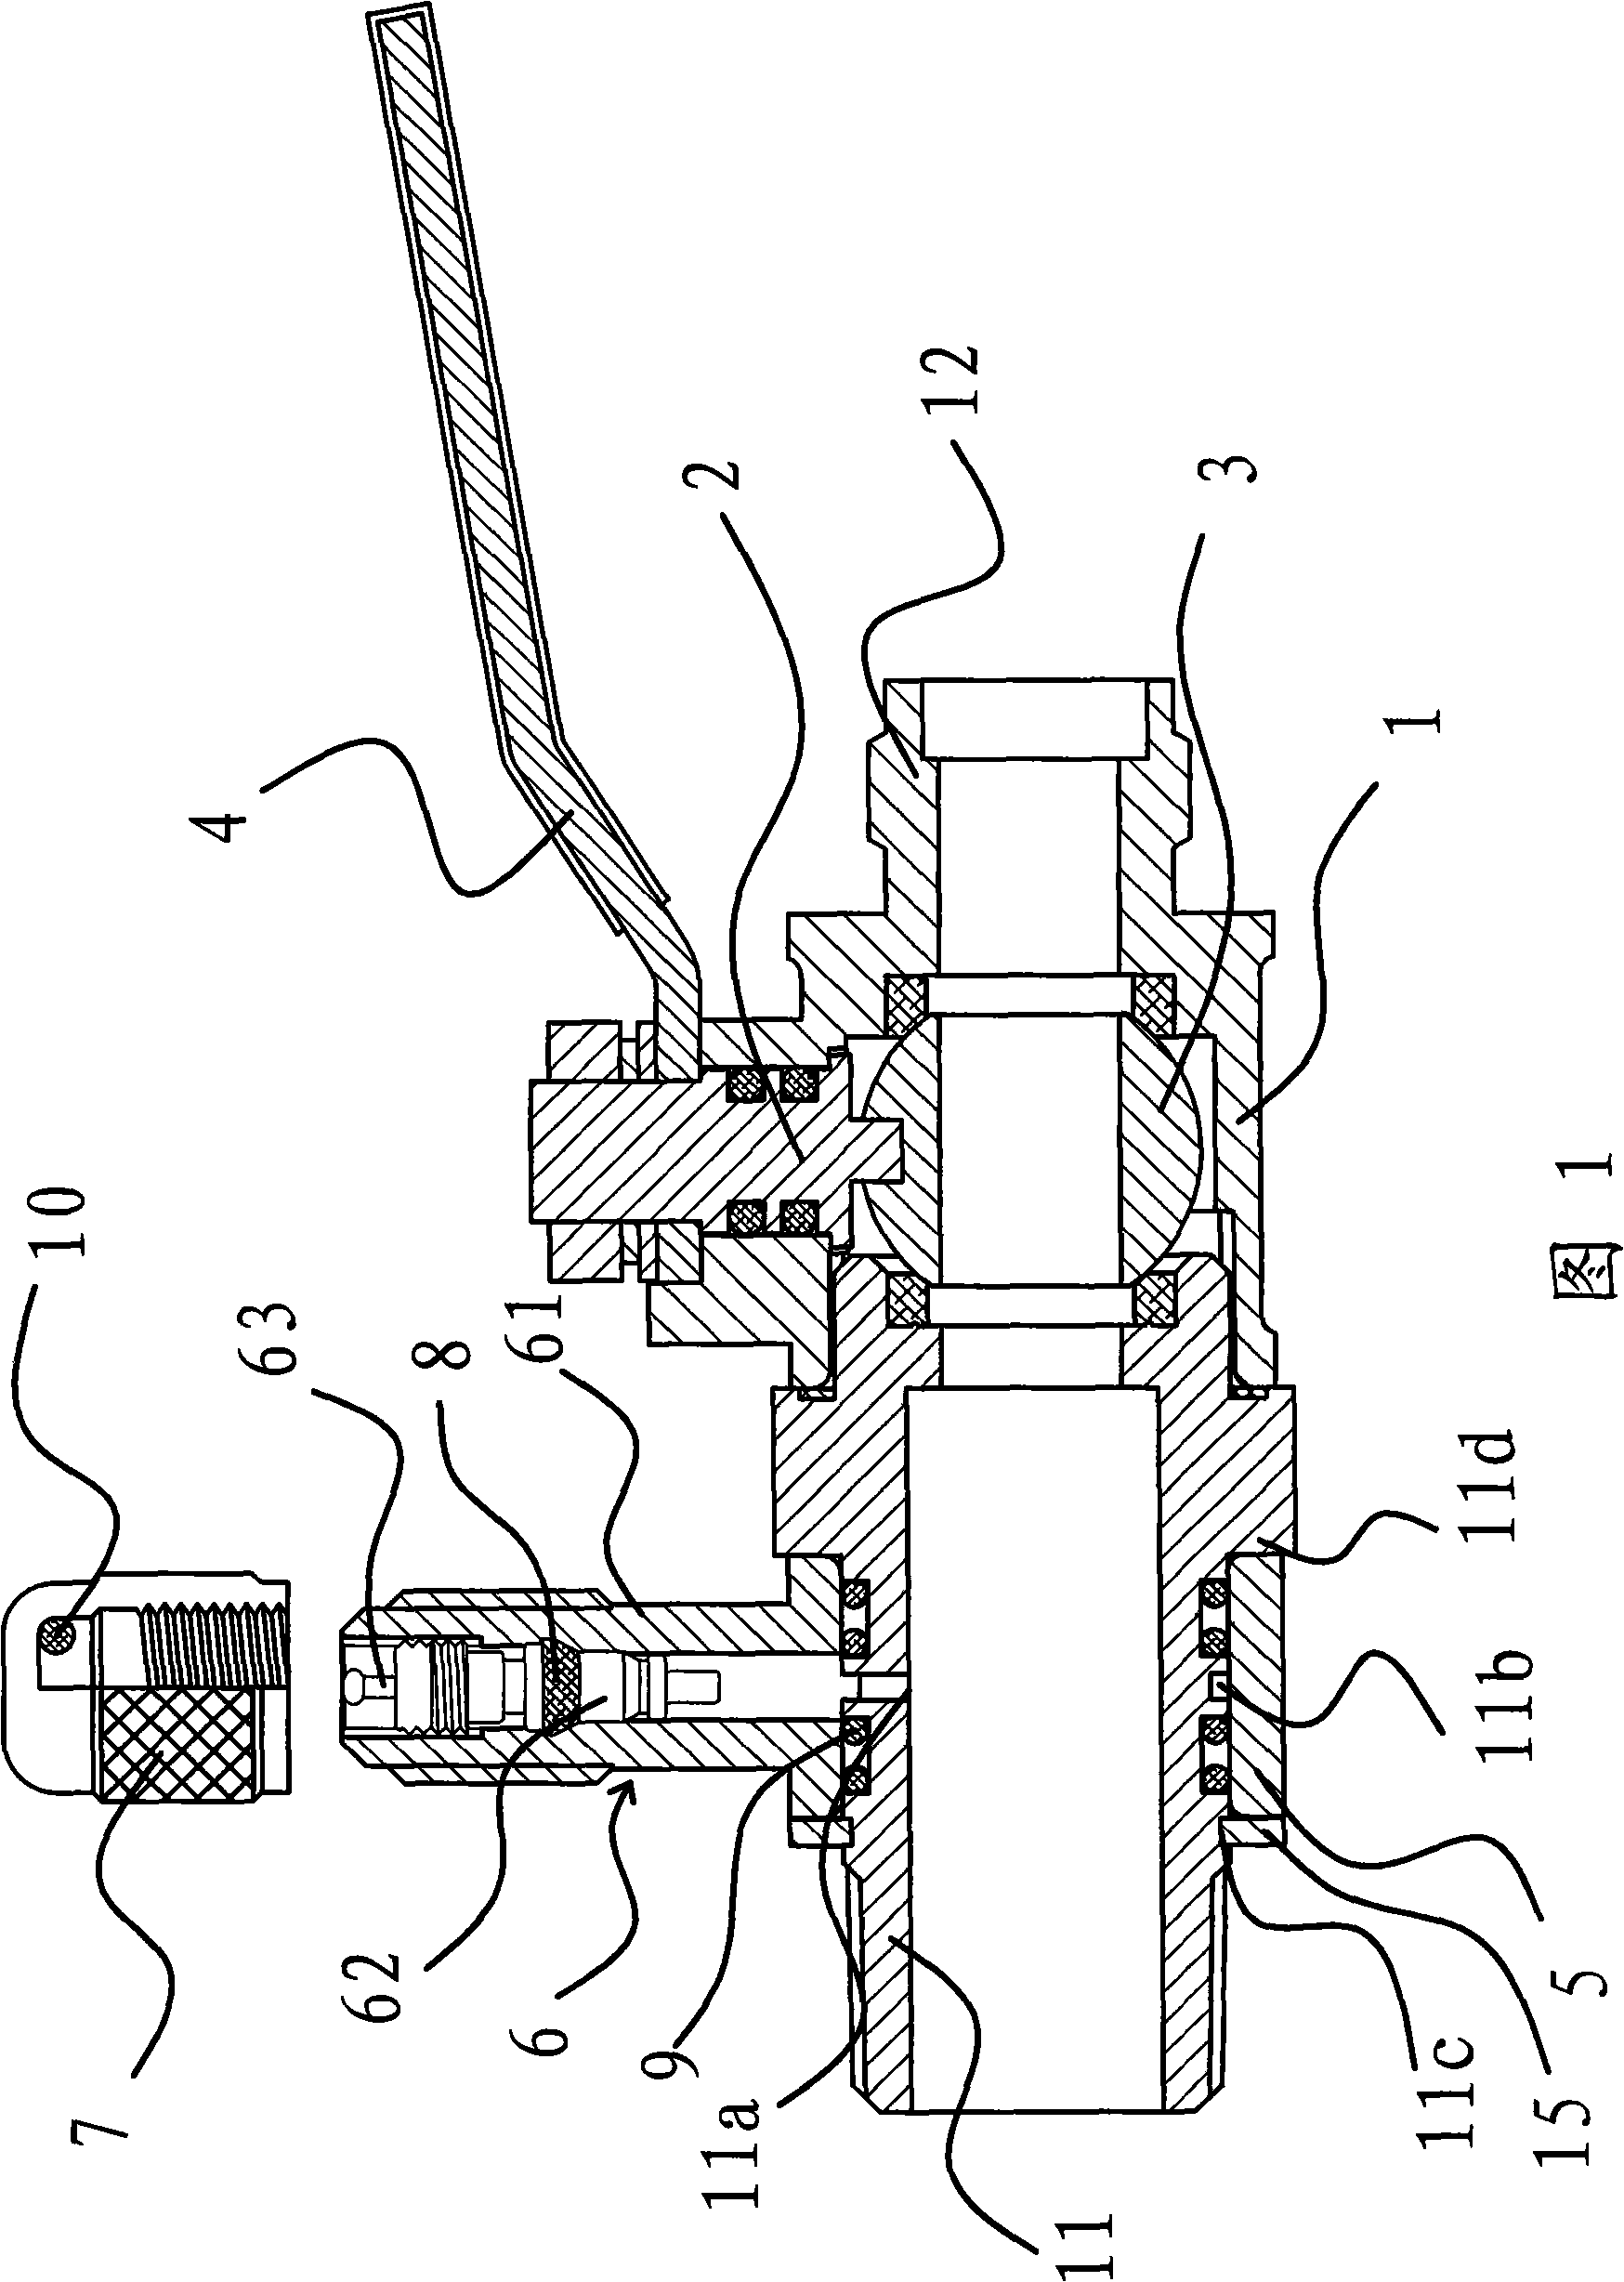 Gas valve with pressure measuring device